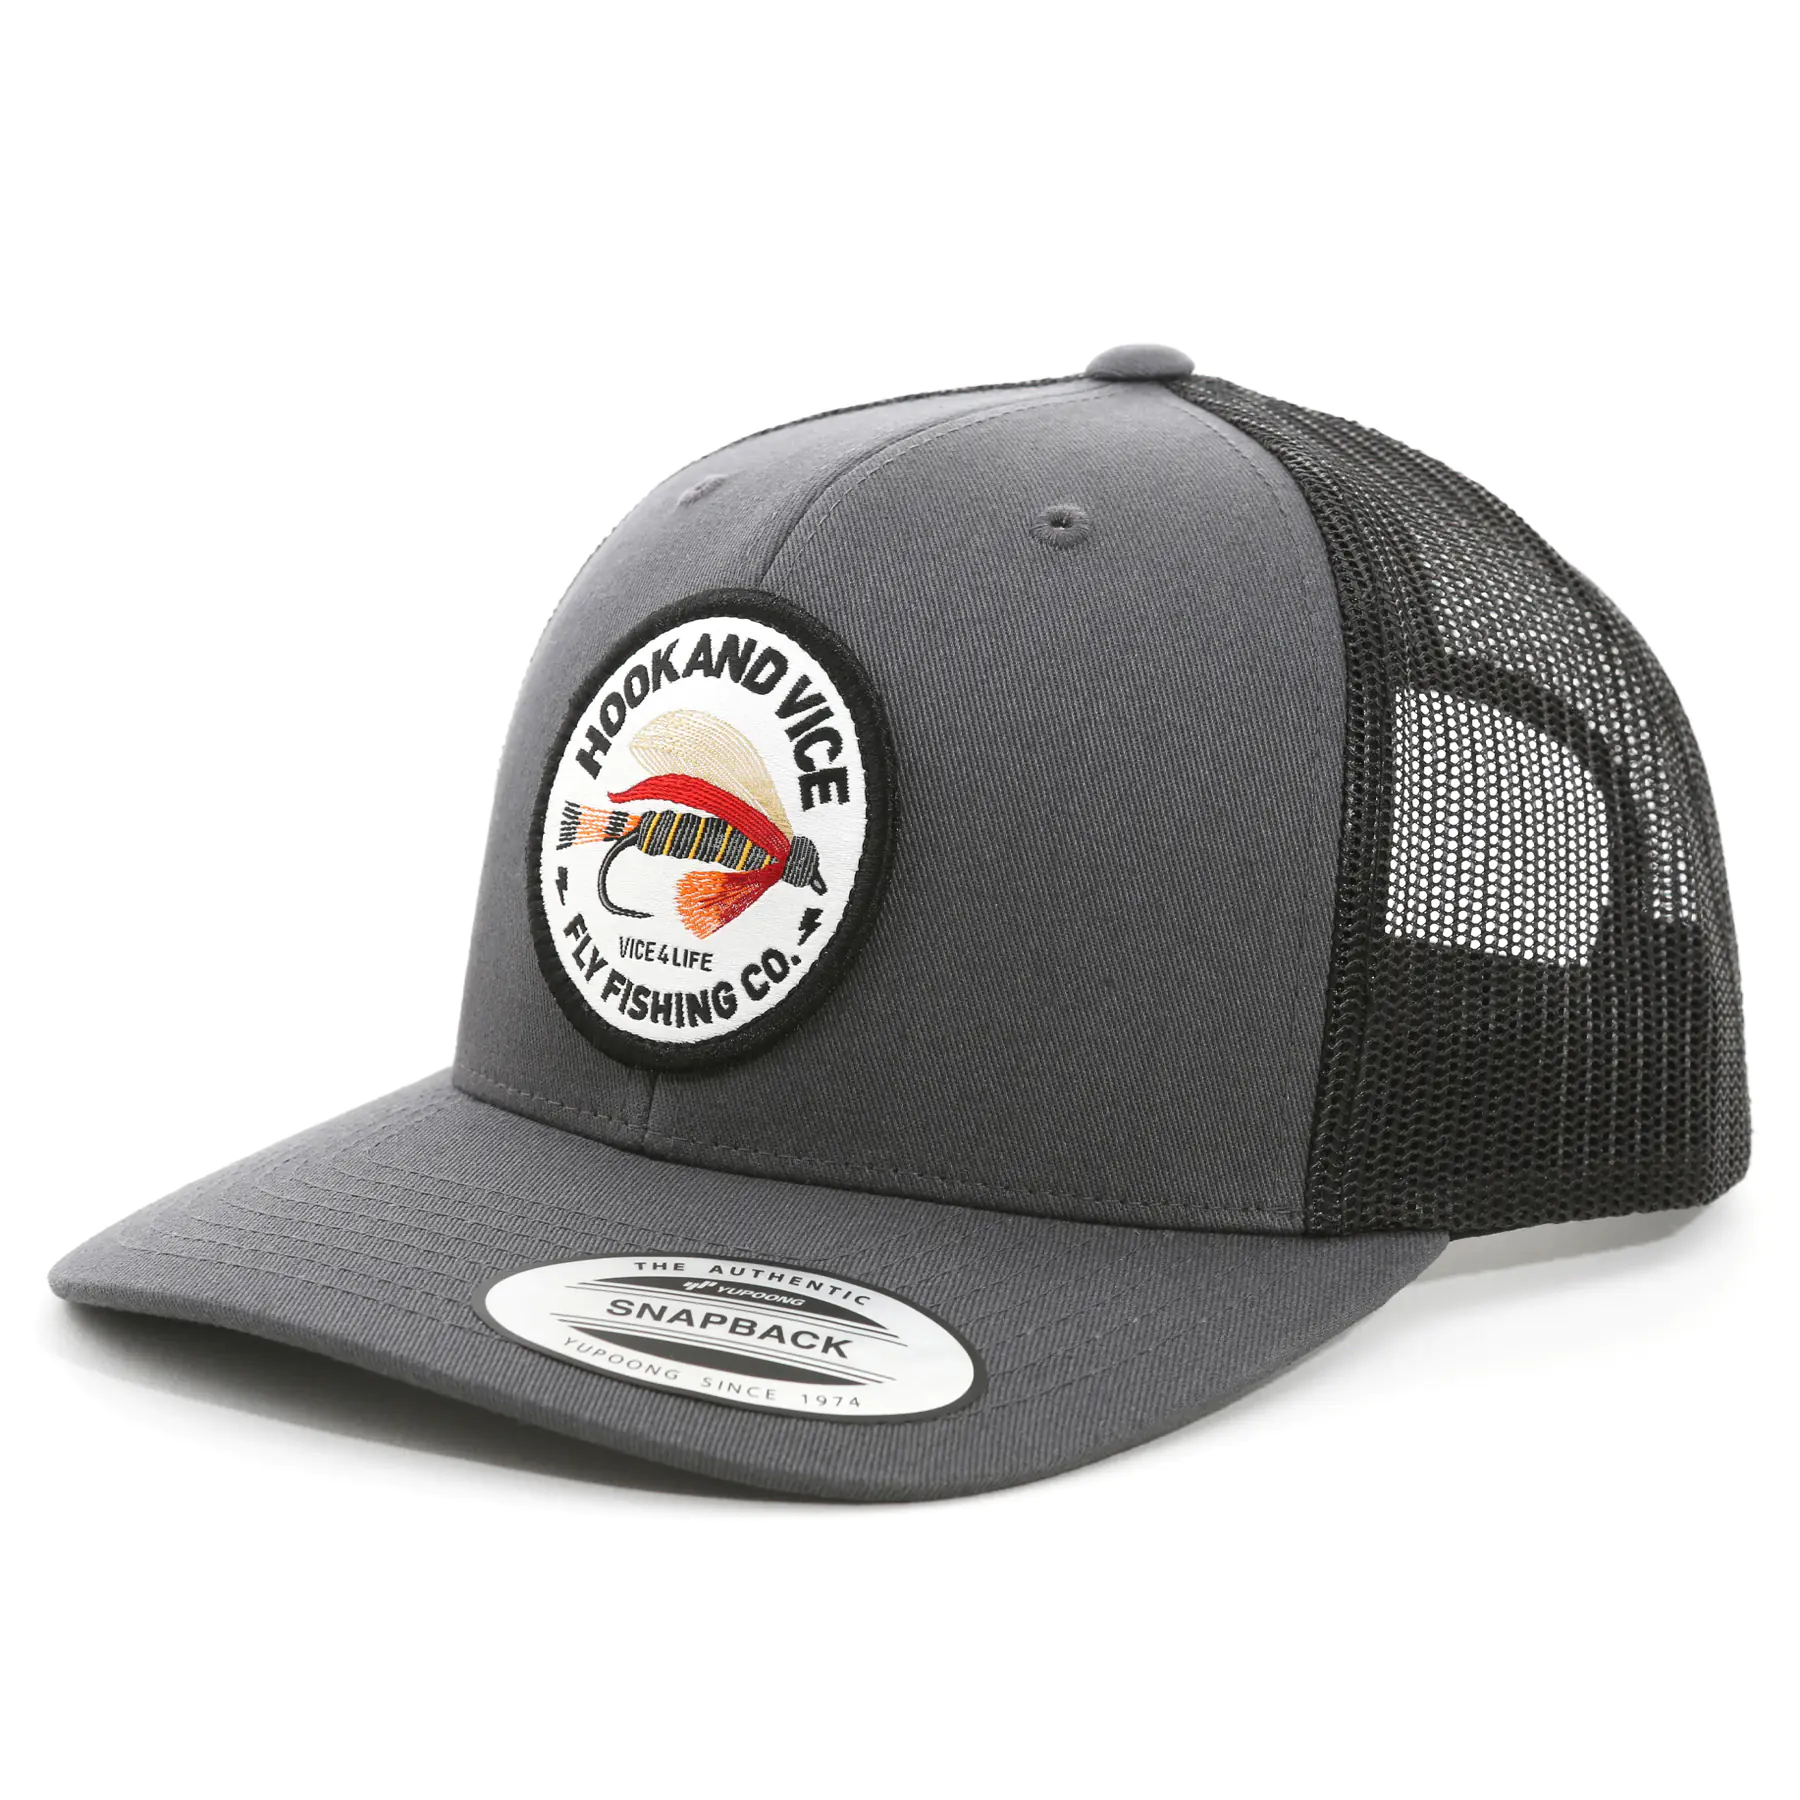 Hook and Vice Pro Model Hat - Fly Tier